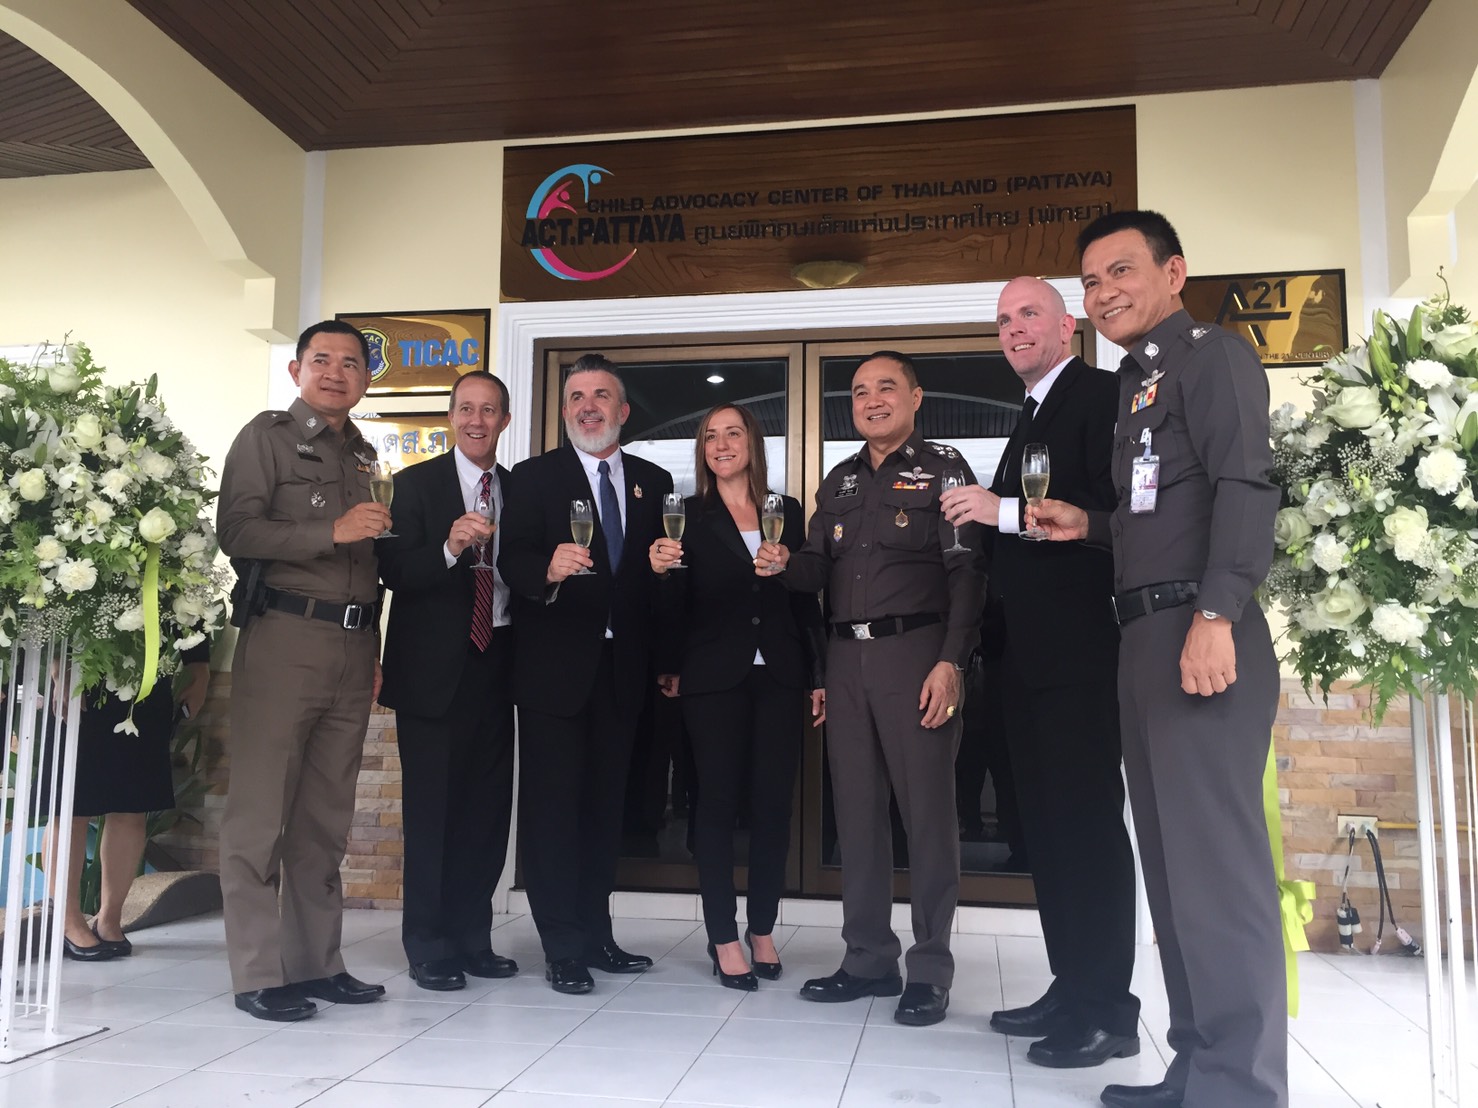 The Royal Thai Police and an anti-human trafficking NGO have joined to open the Child Advocacy Center in Pattaya.